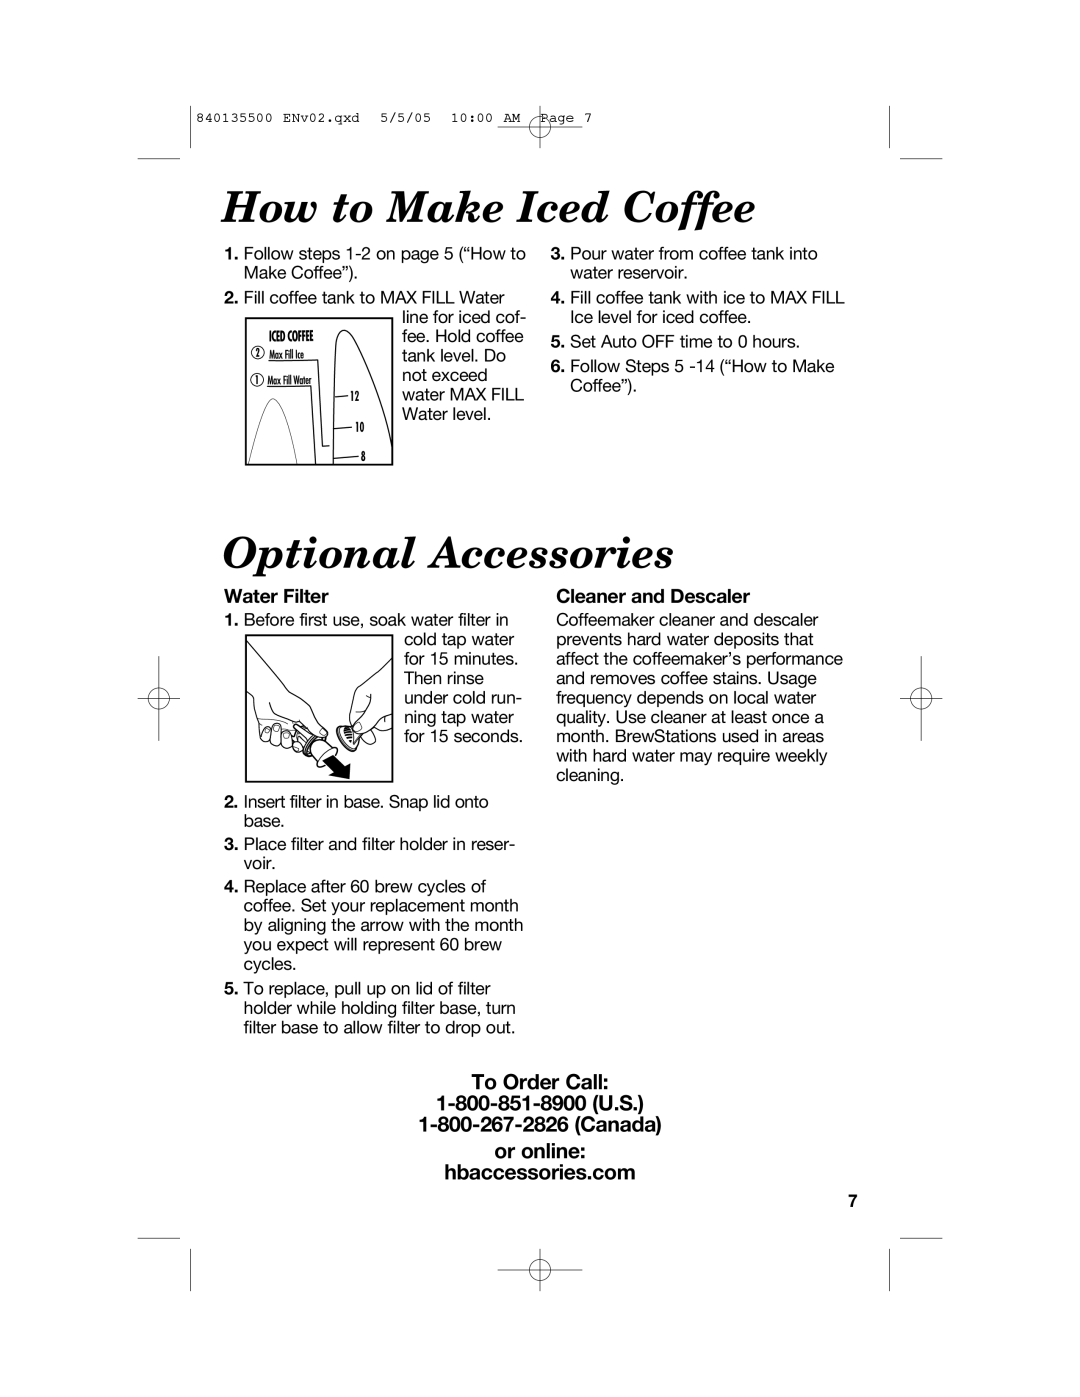 Hamilton Beach 47451 manual How to Make Iced Coffee, Optional Accessories, To Order Call, or online hbaccessories.com 